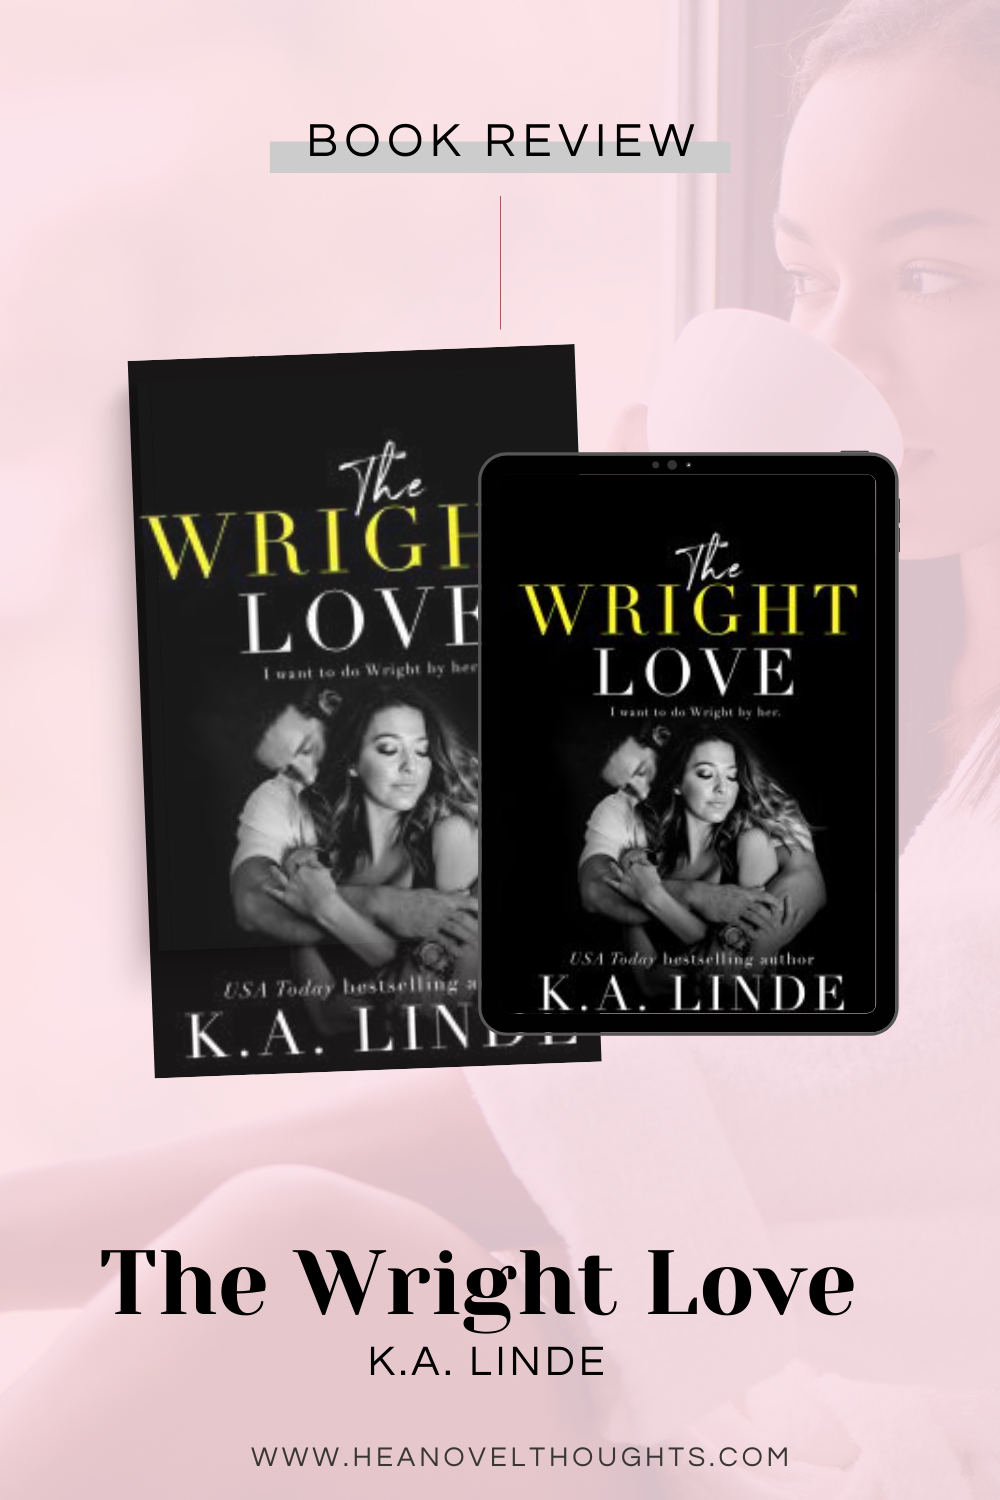 The Wright Love by K.A. Linde